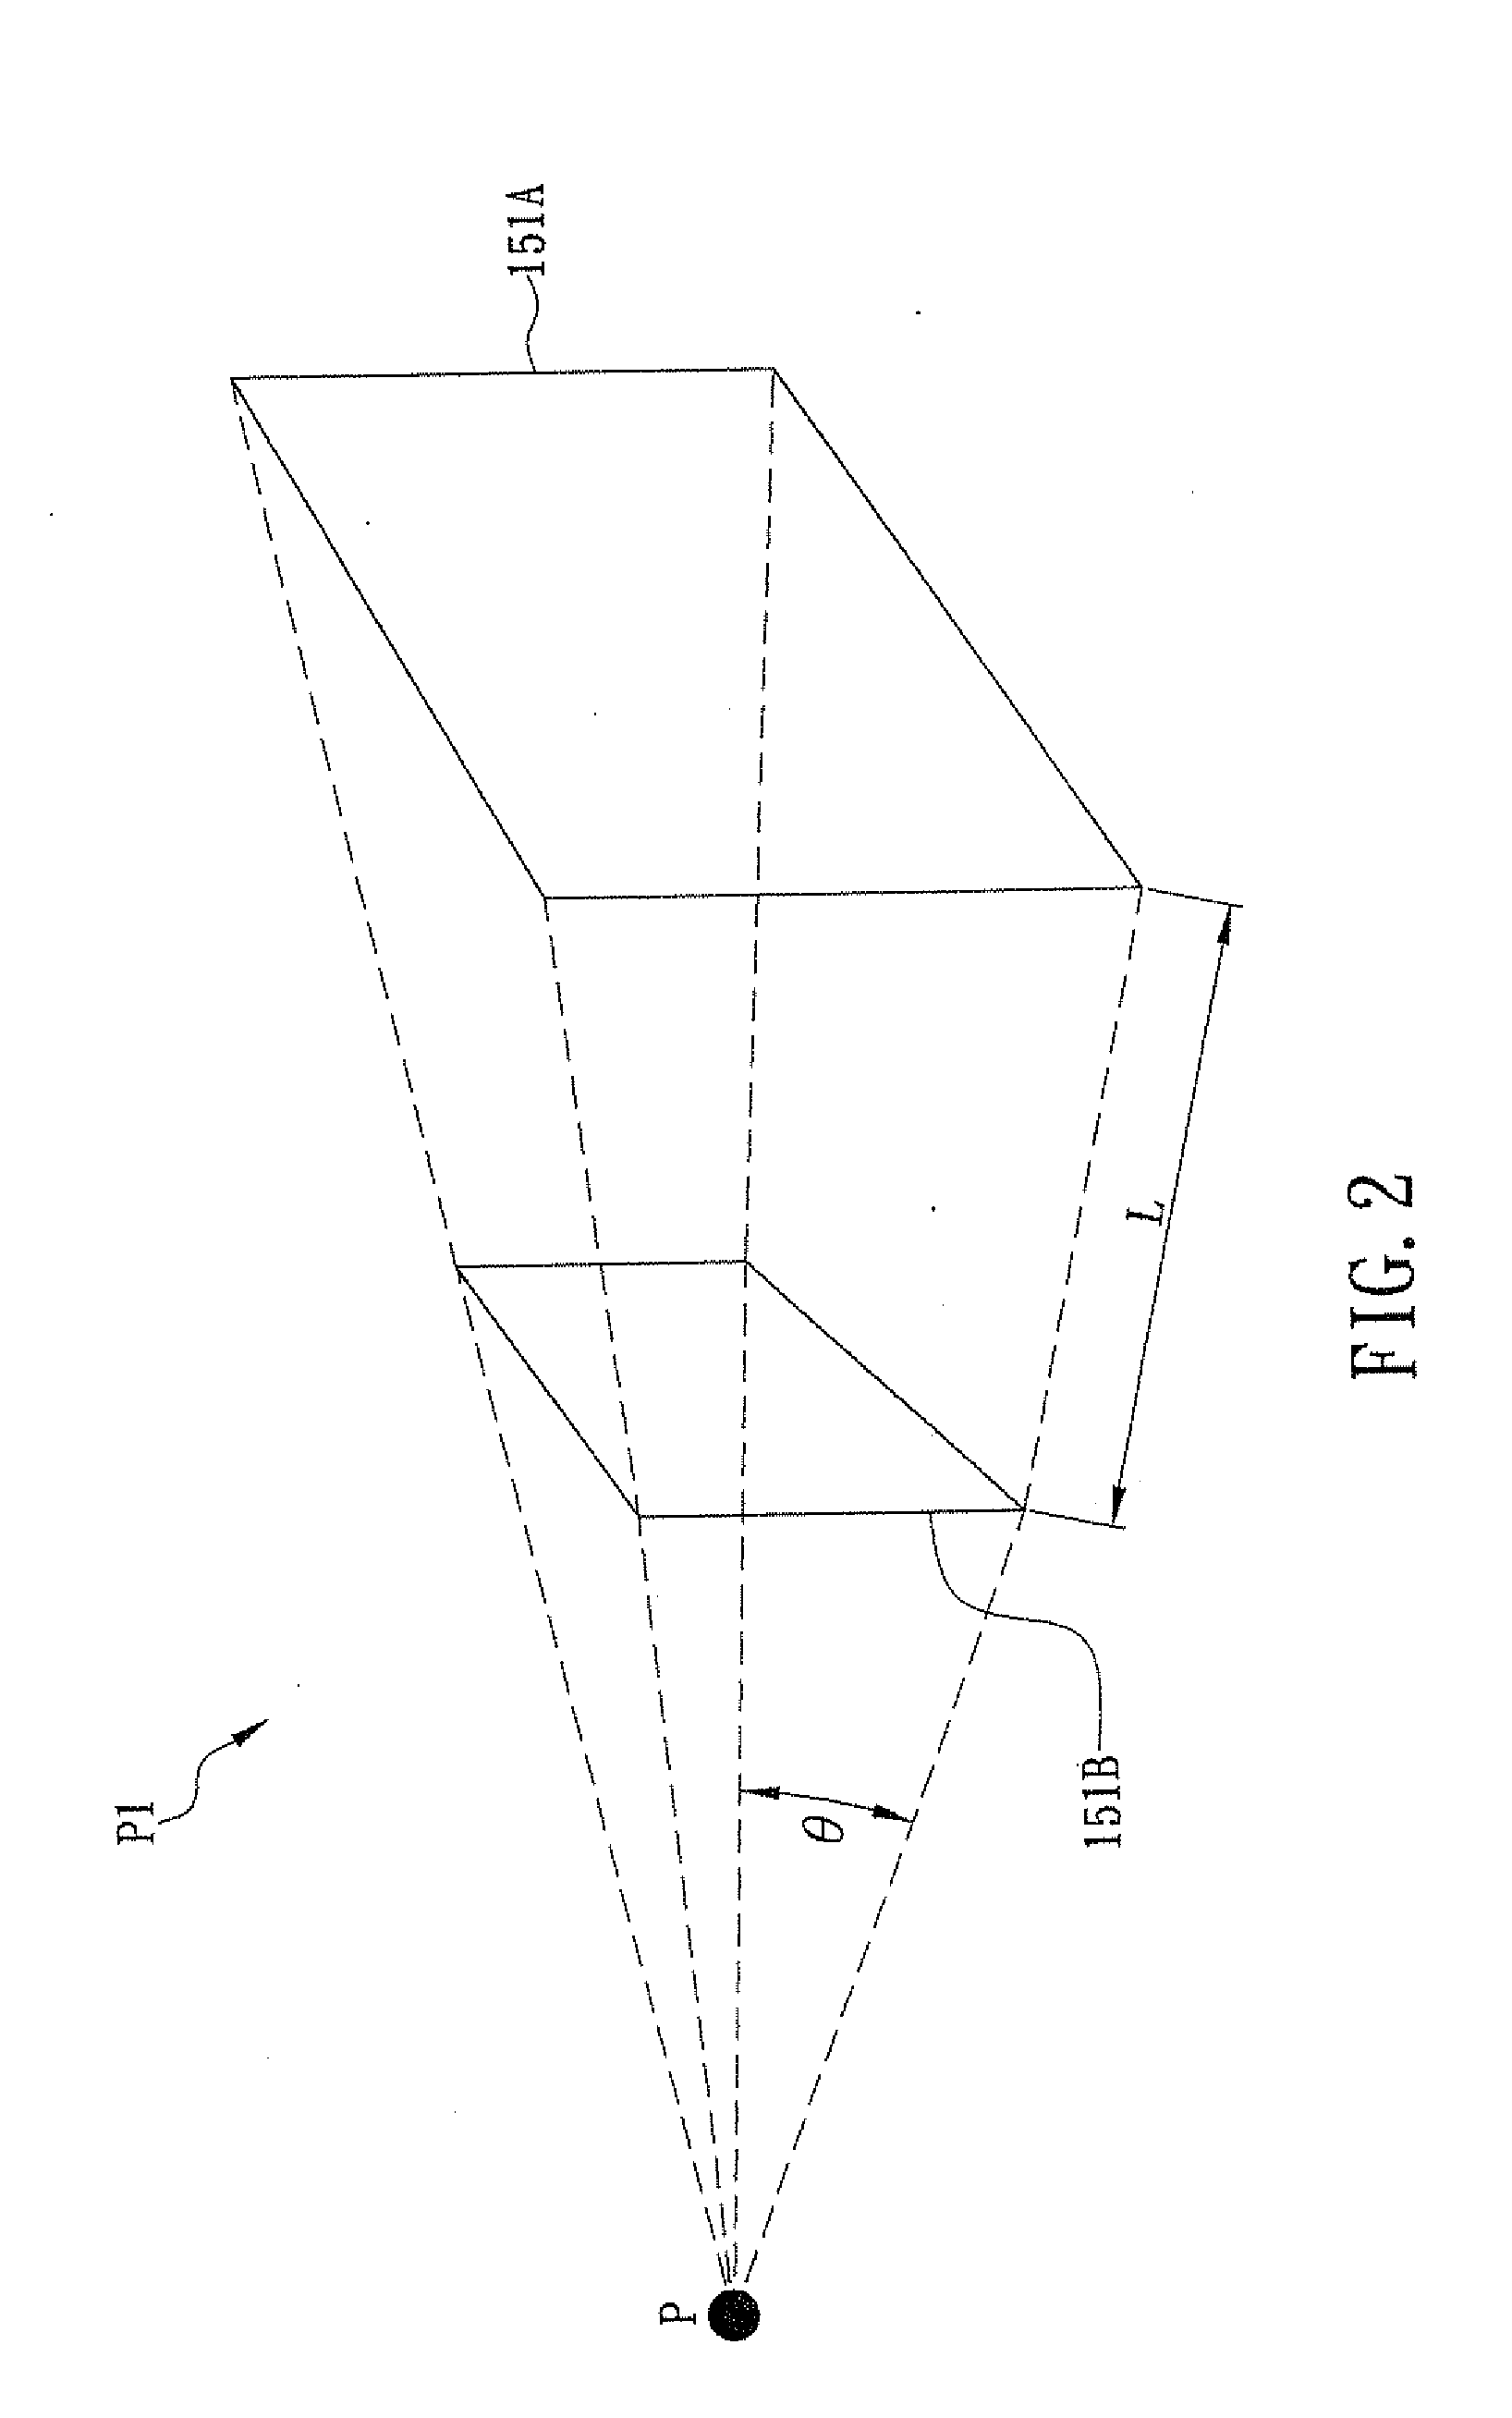 Method for switching audio playback between foreground area and background area in screen image using audio/video programs